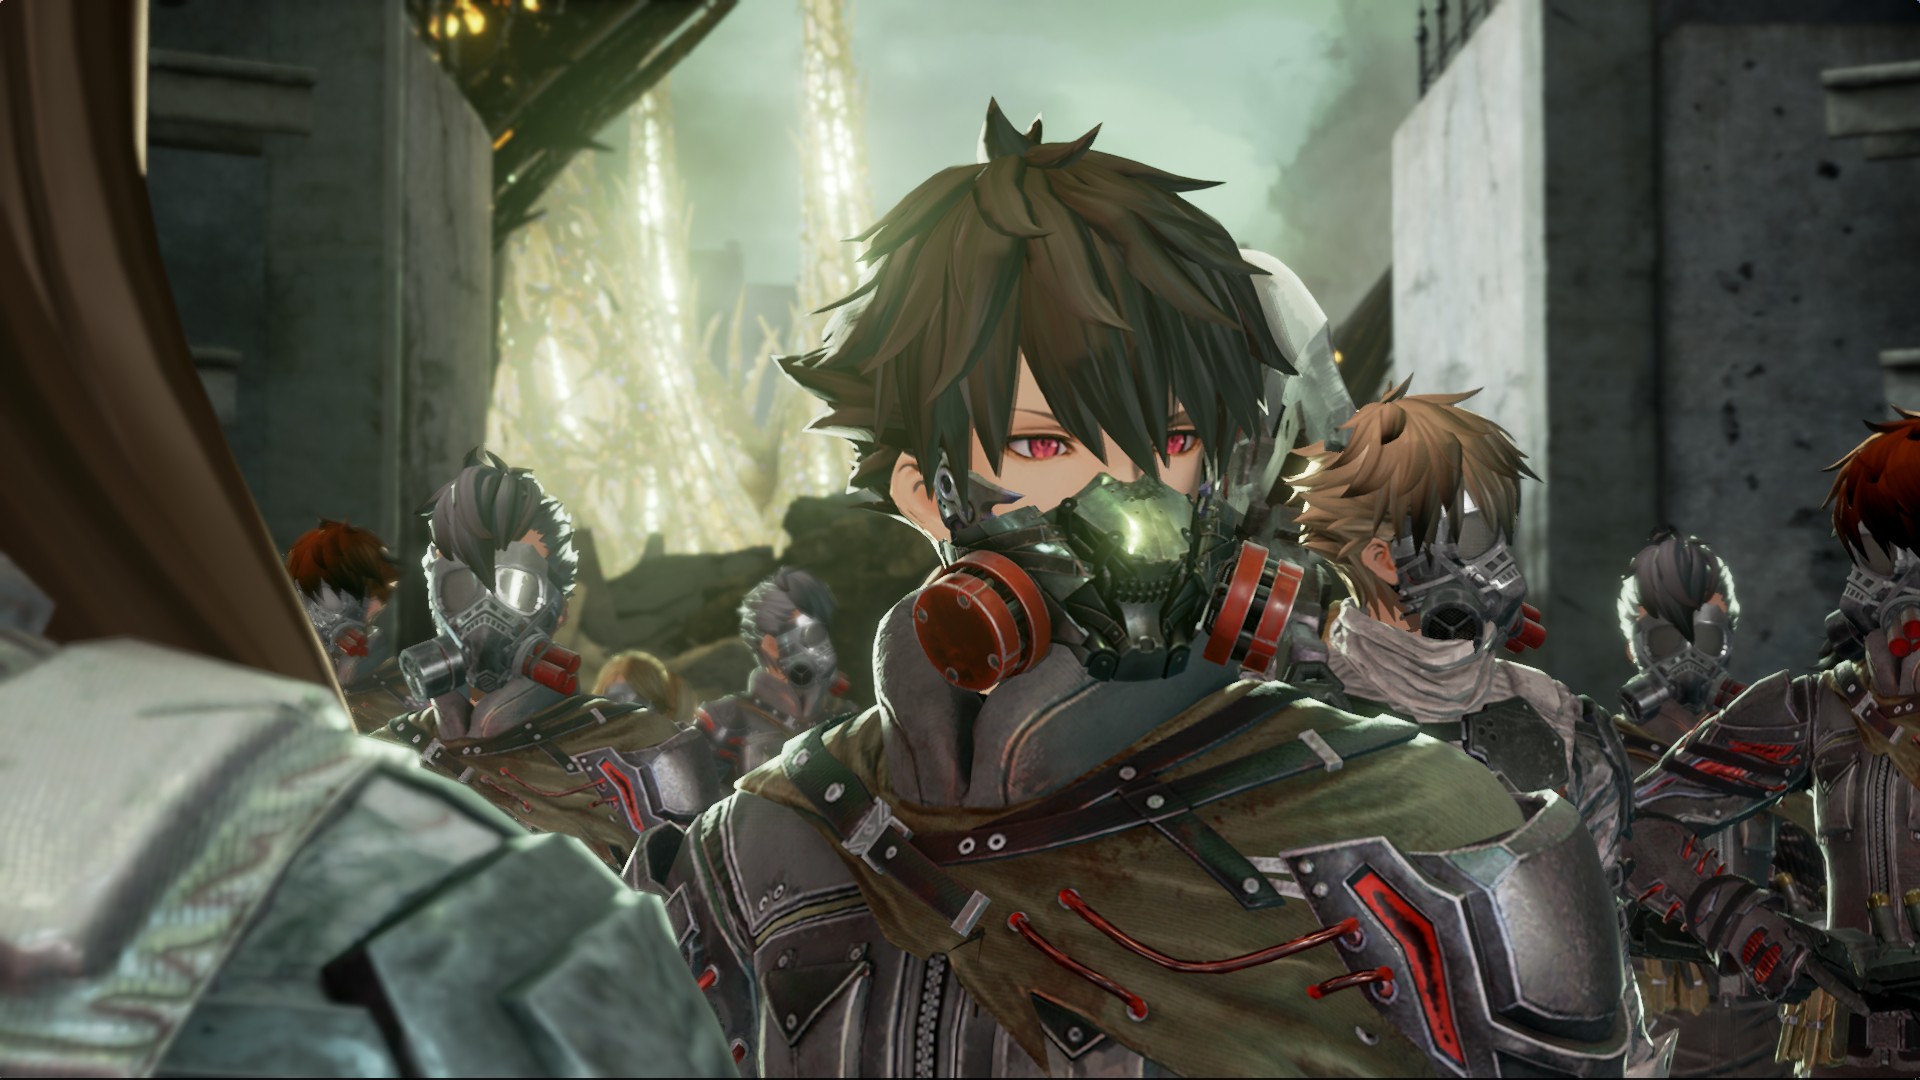 E3 2018: Code Vein Hands-On Preview: Anime Souls